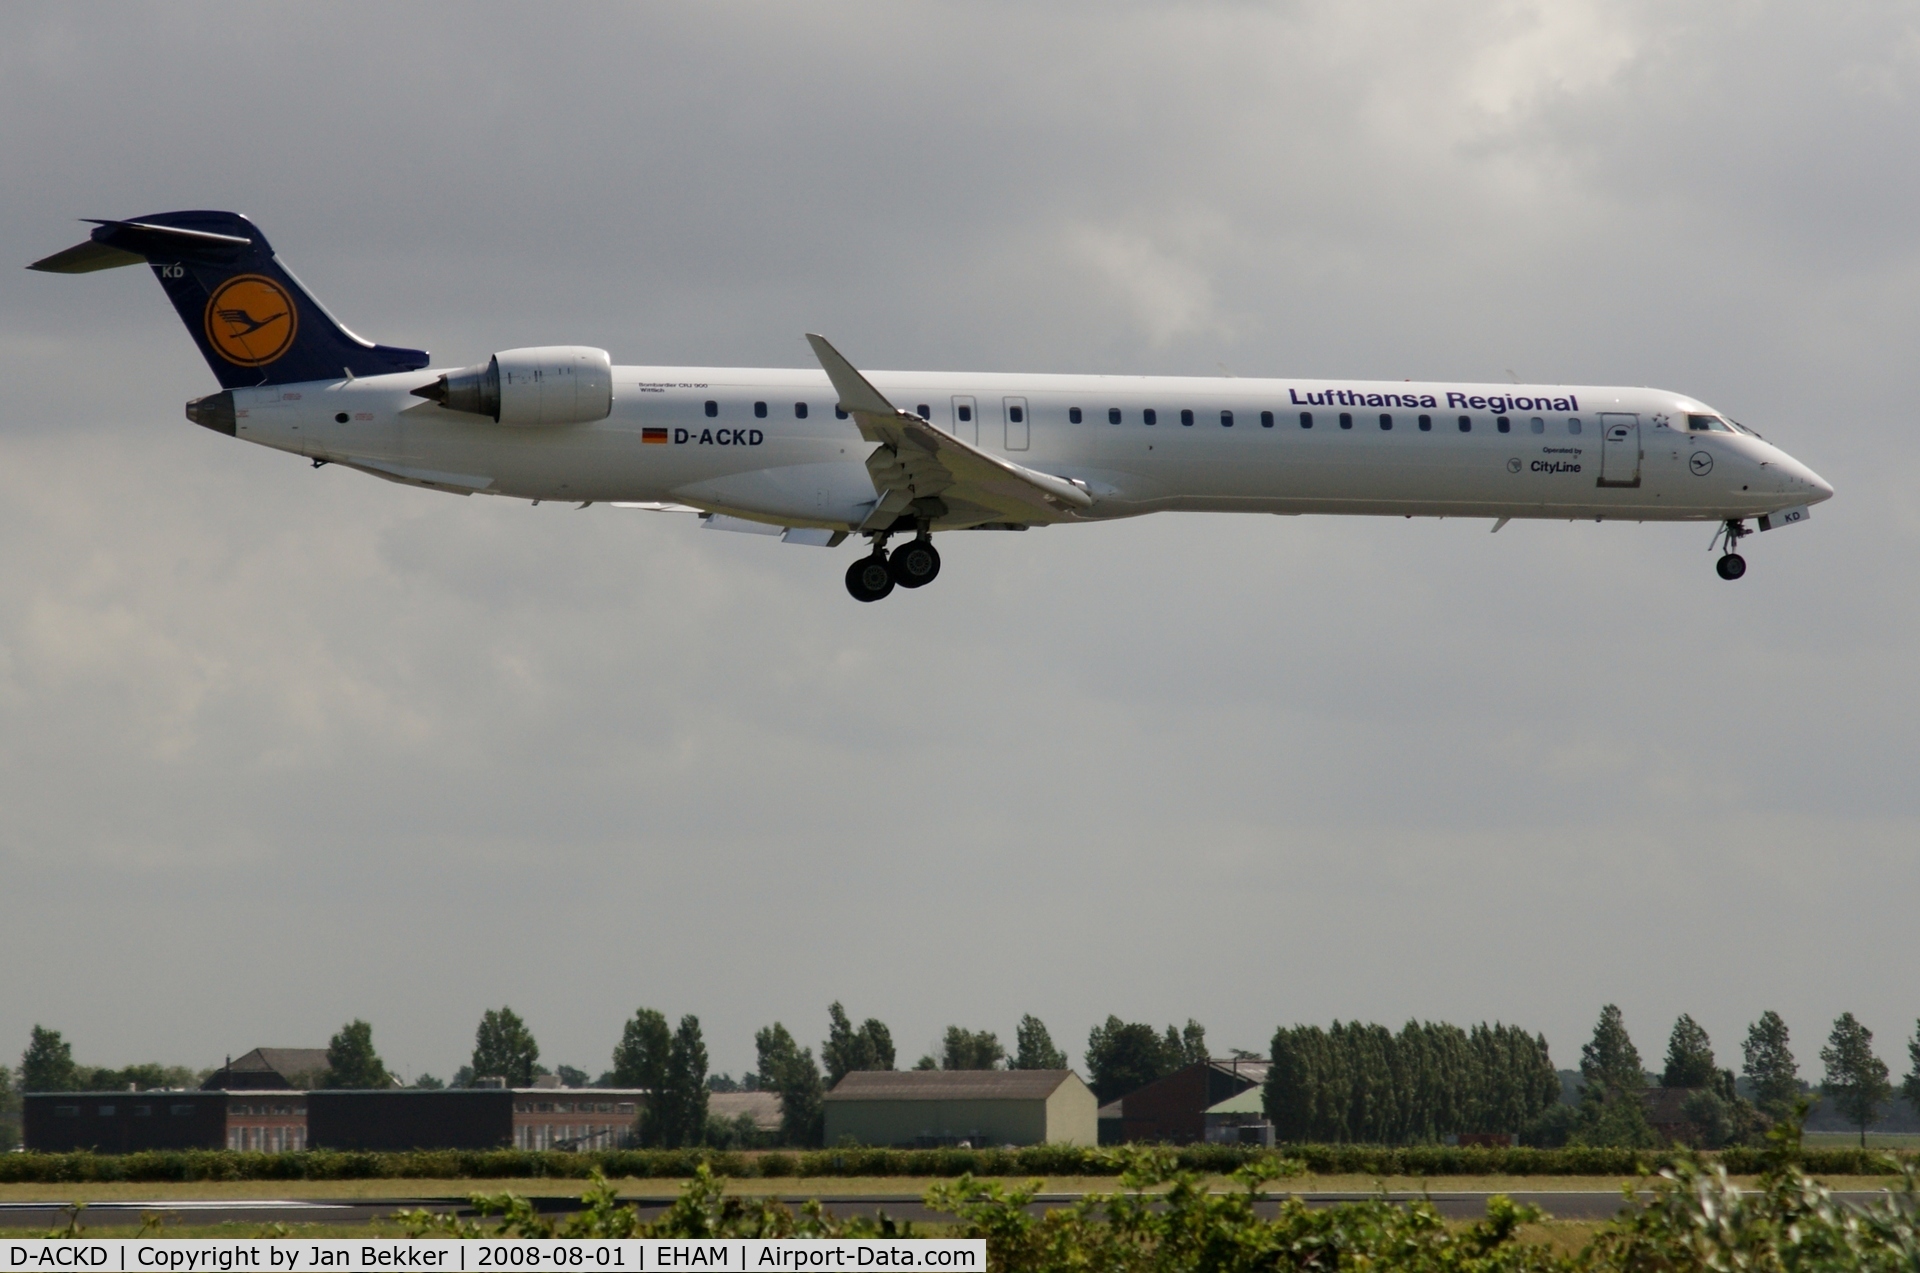 D-ACKD, 2006 Bombardier CRJ-900LR (CL-600-2D24) C/N 15080, Just before landing on the 